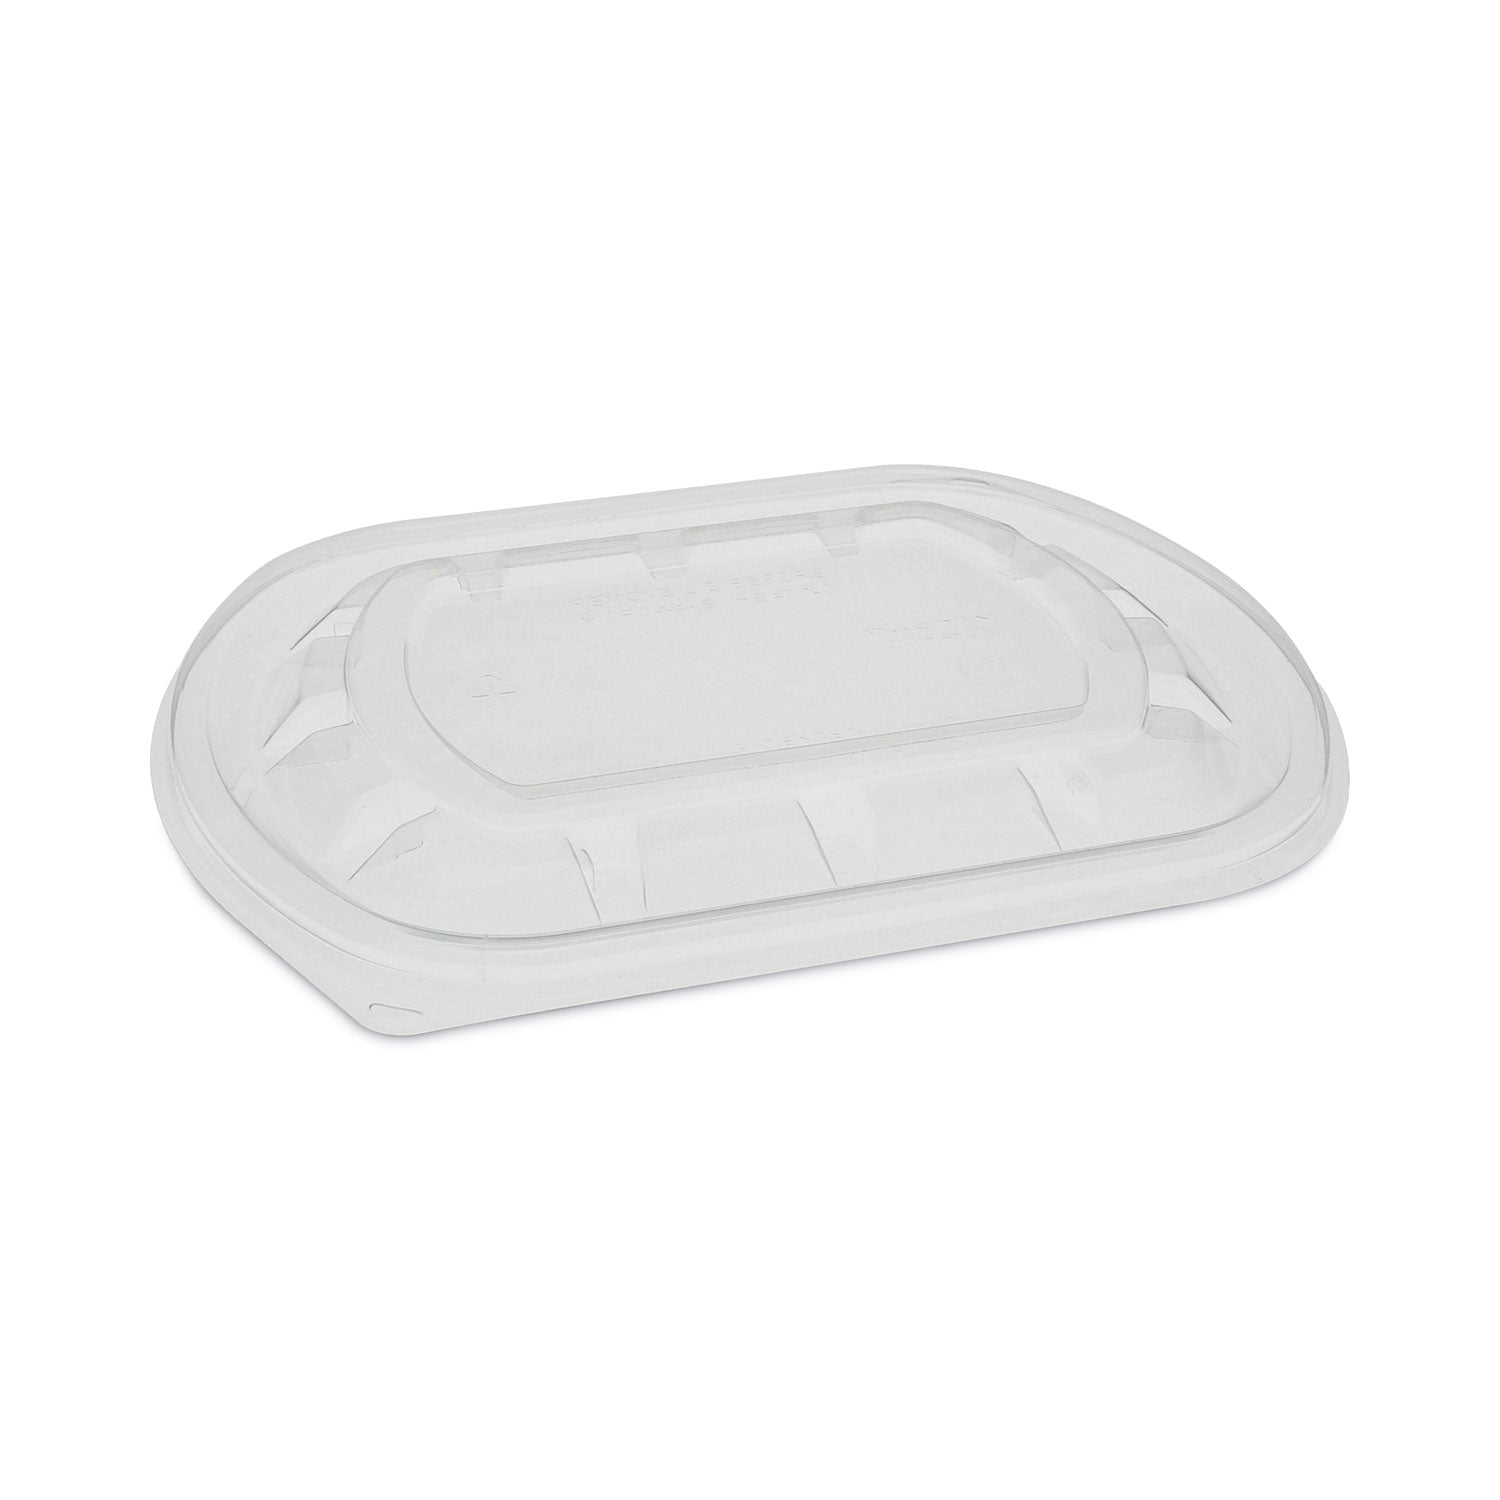 clearview-mealmaster-lid-with-fog-gard-coating-medium-flat-lid-813-x-65-x-038-clear-plastic-252-carton_pctycn8462s00d0 - 1